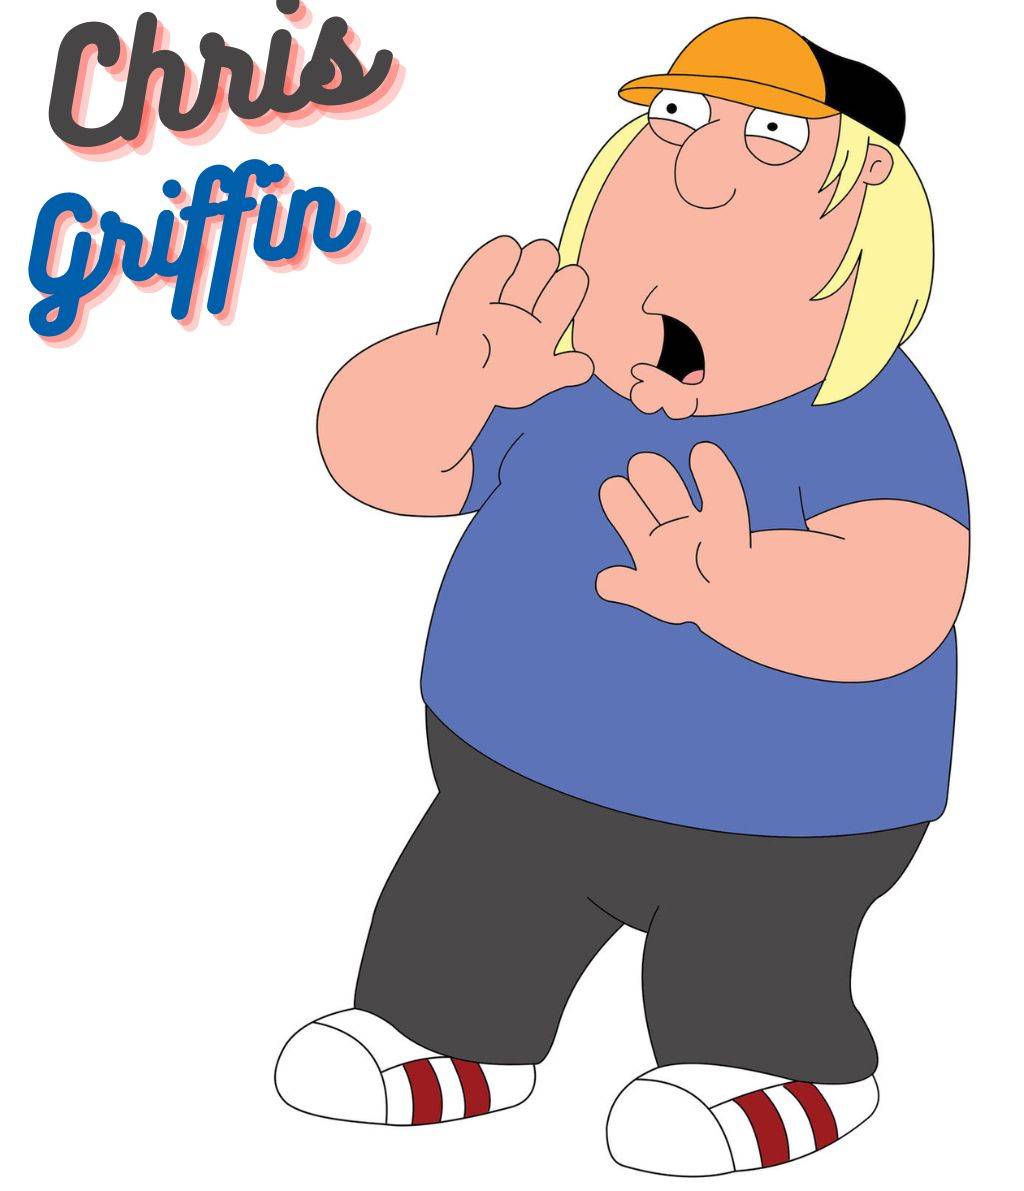 chris griffin, who voices chris griffin, chris family guy, cris griffin, chris grifin, family guy chris, chris from family guy, peter griffin birthday, chris chan family guy